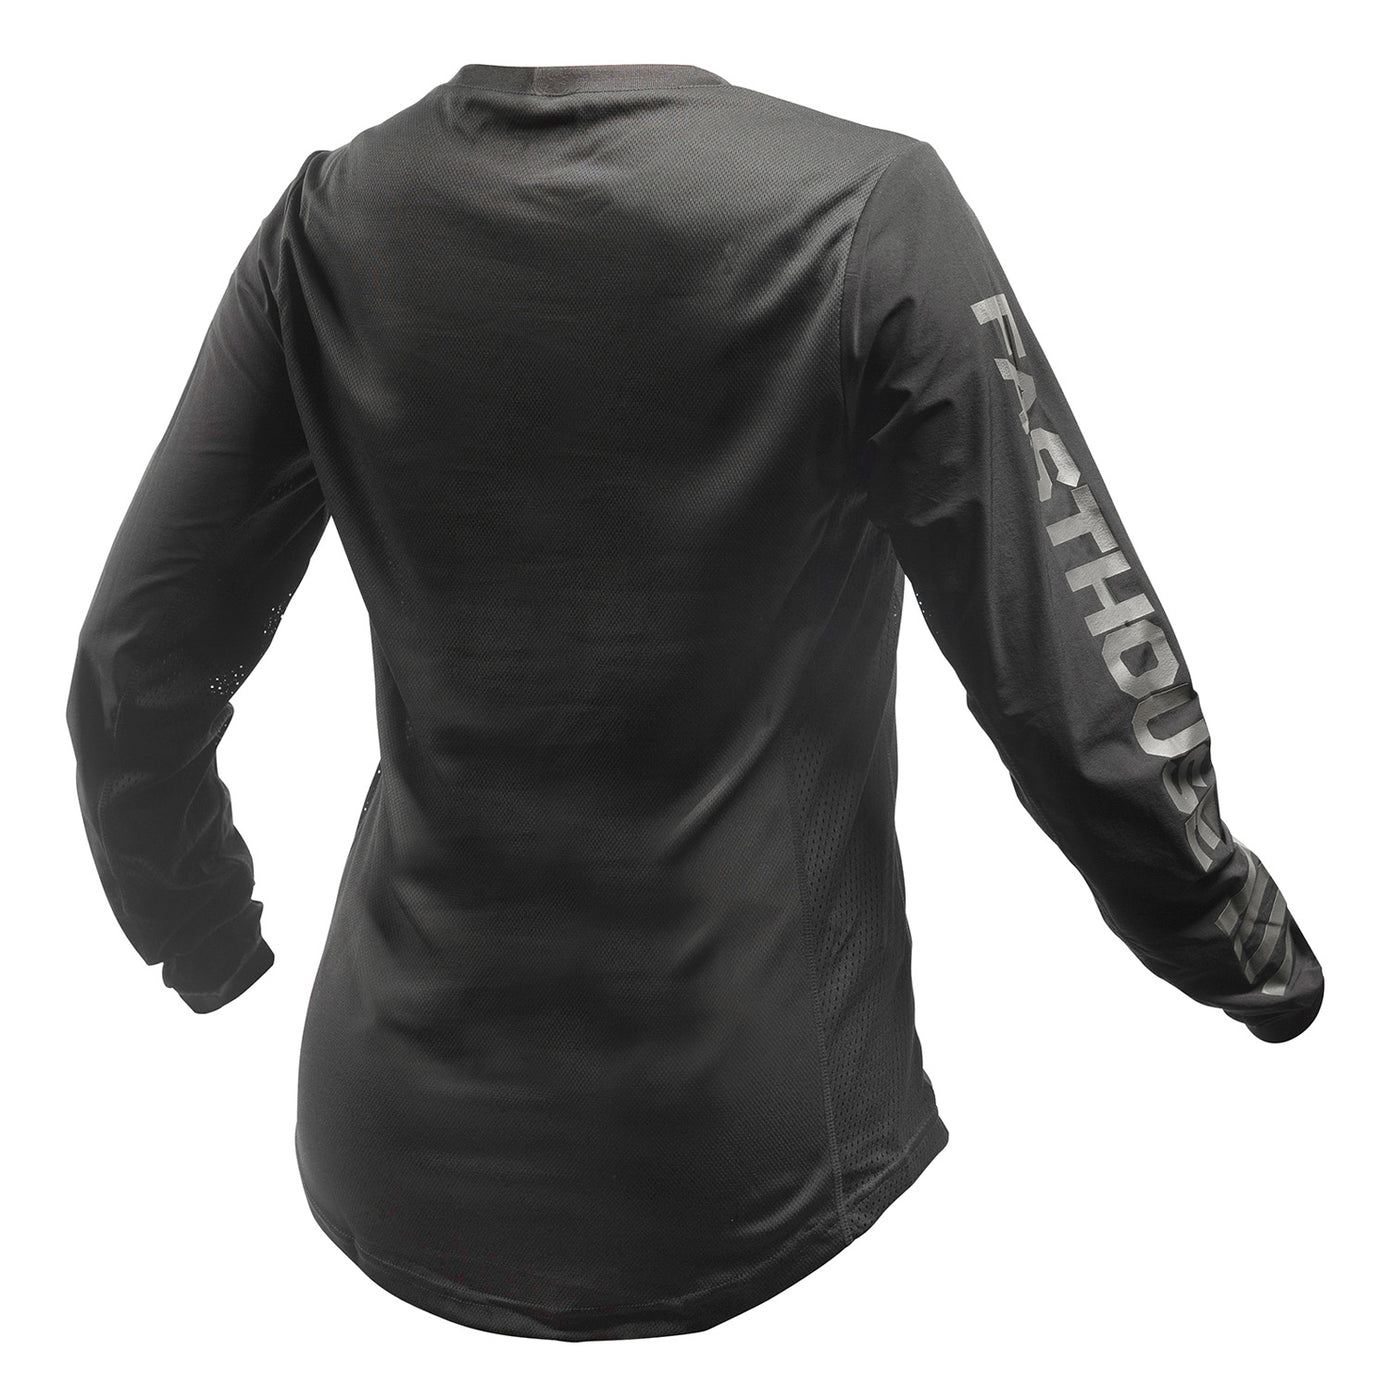 Fasthouse Women's Off-Road Sand Cat Jersey